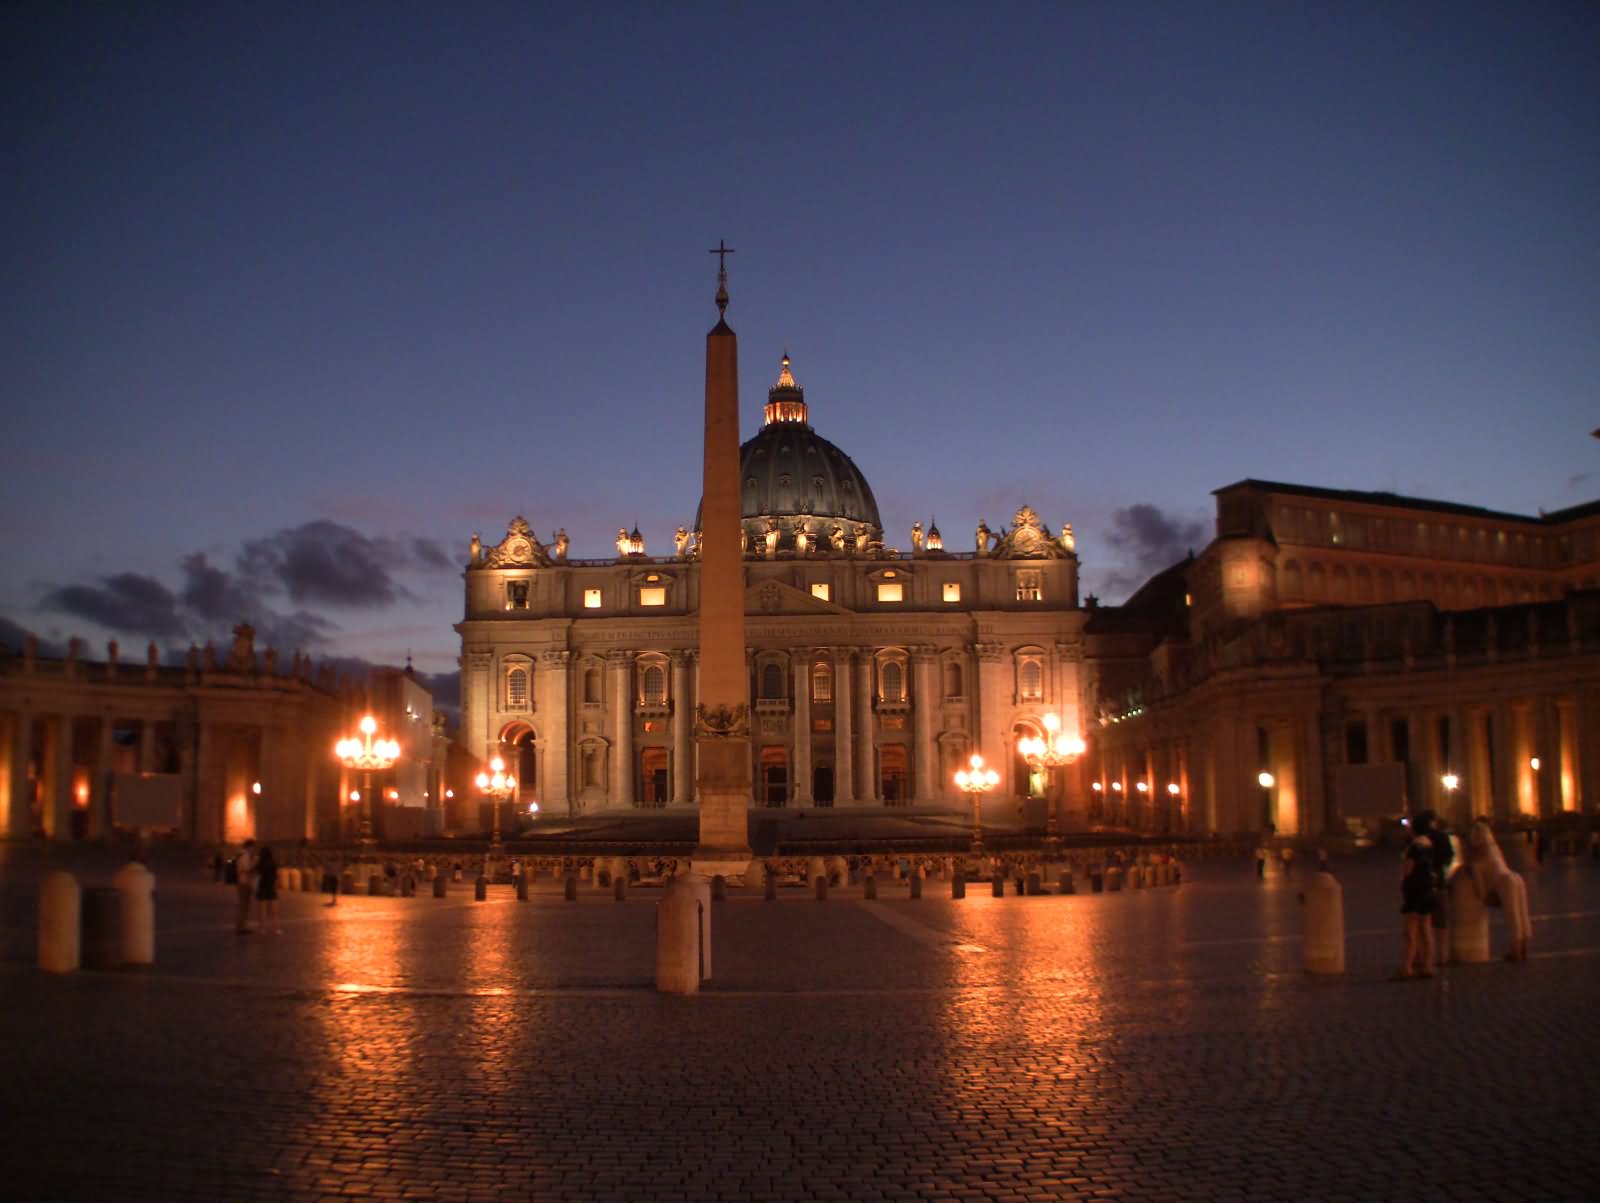 St. Peter's Basilica And Square At Night